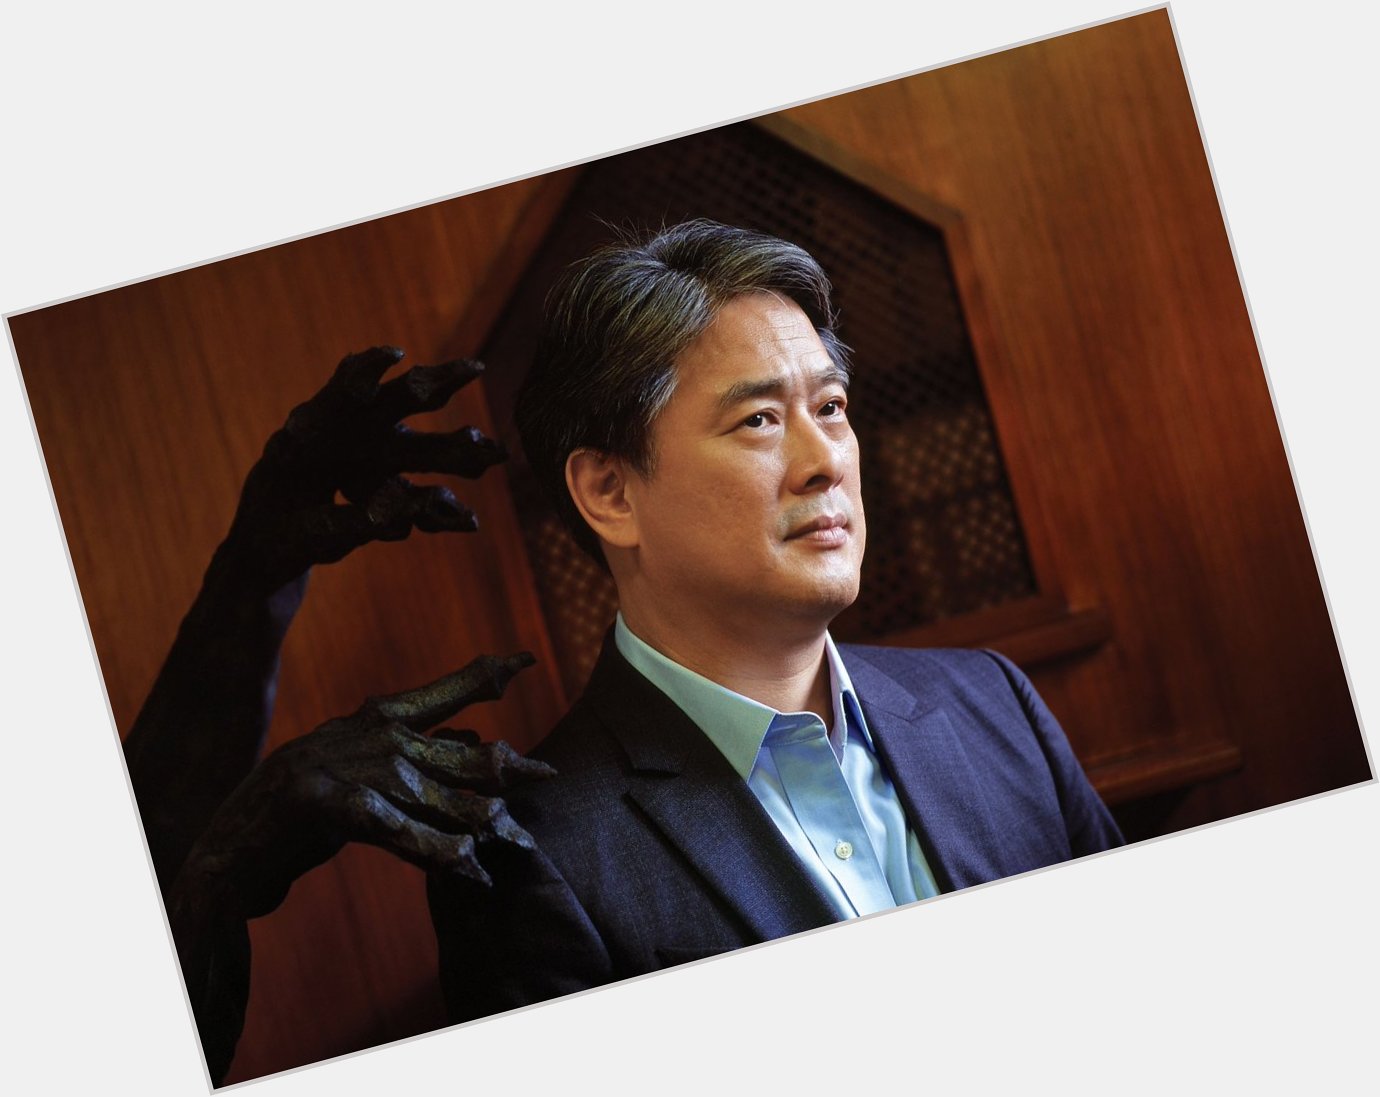 Happy birthday to the brilliant park chan-wook aka my favorite director of all time <3 